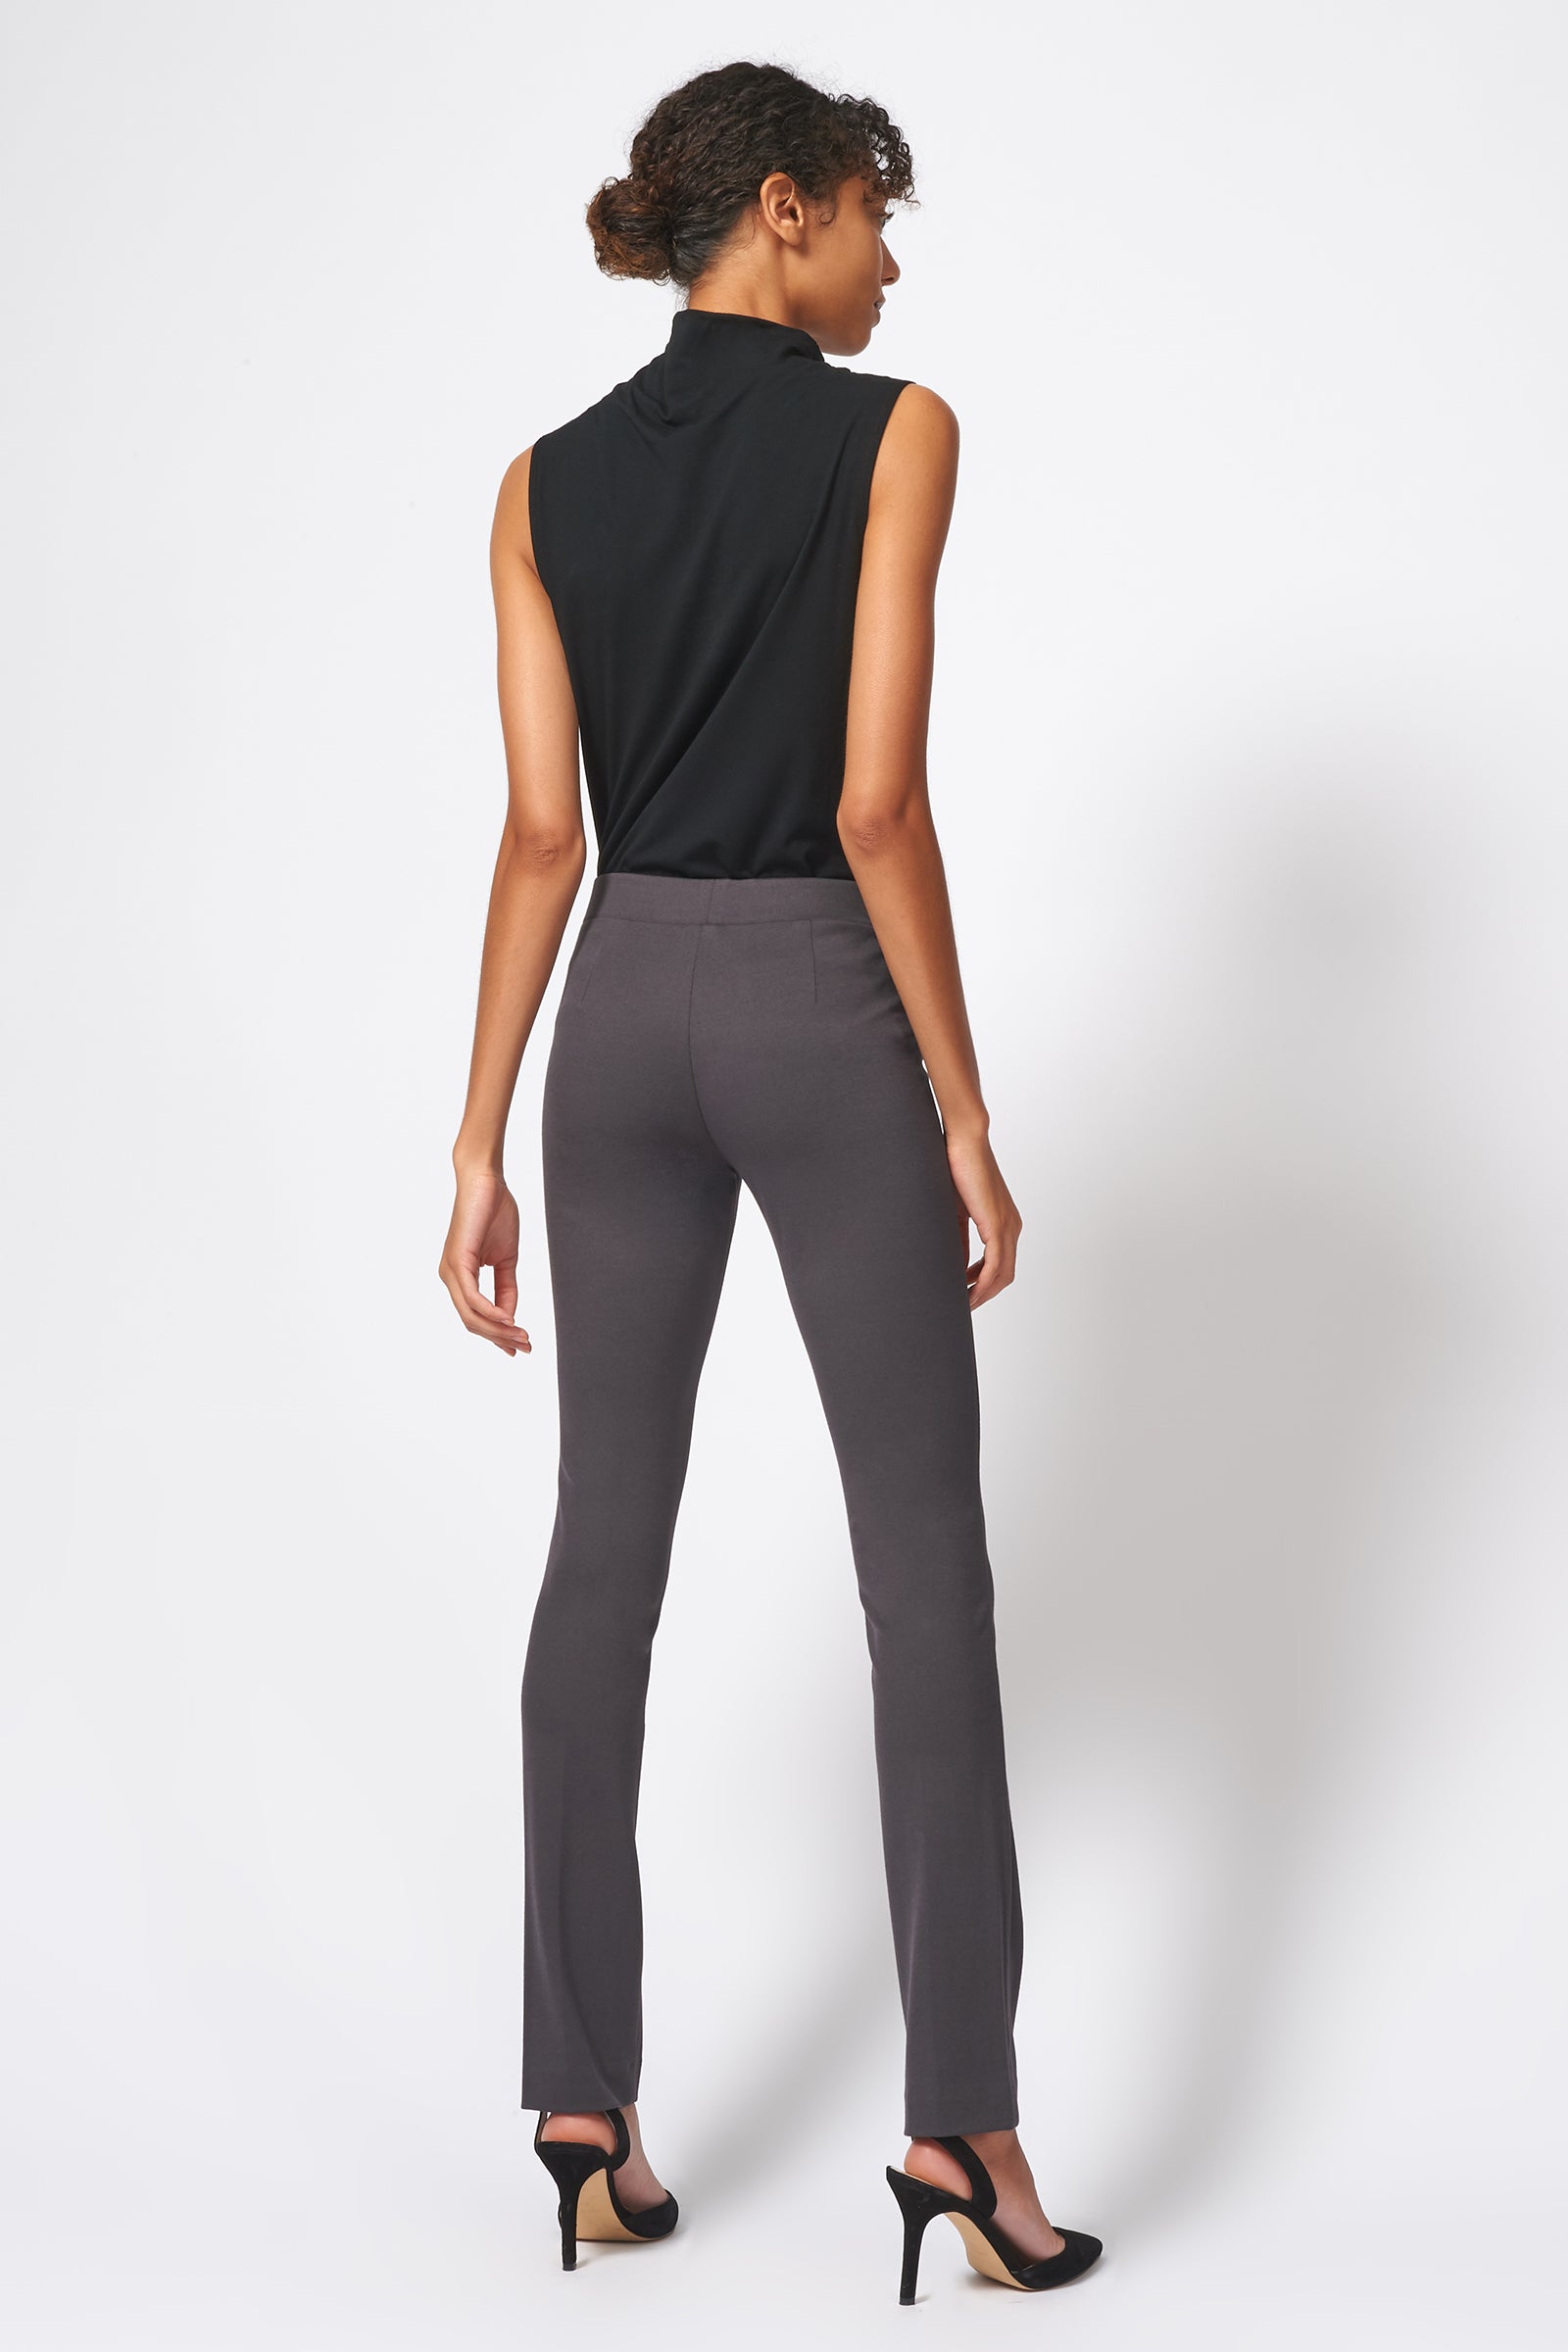 Kal Rieman Pintuck Ponte Straight Leg Pant in Charcoal on Model Front Side View